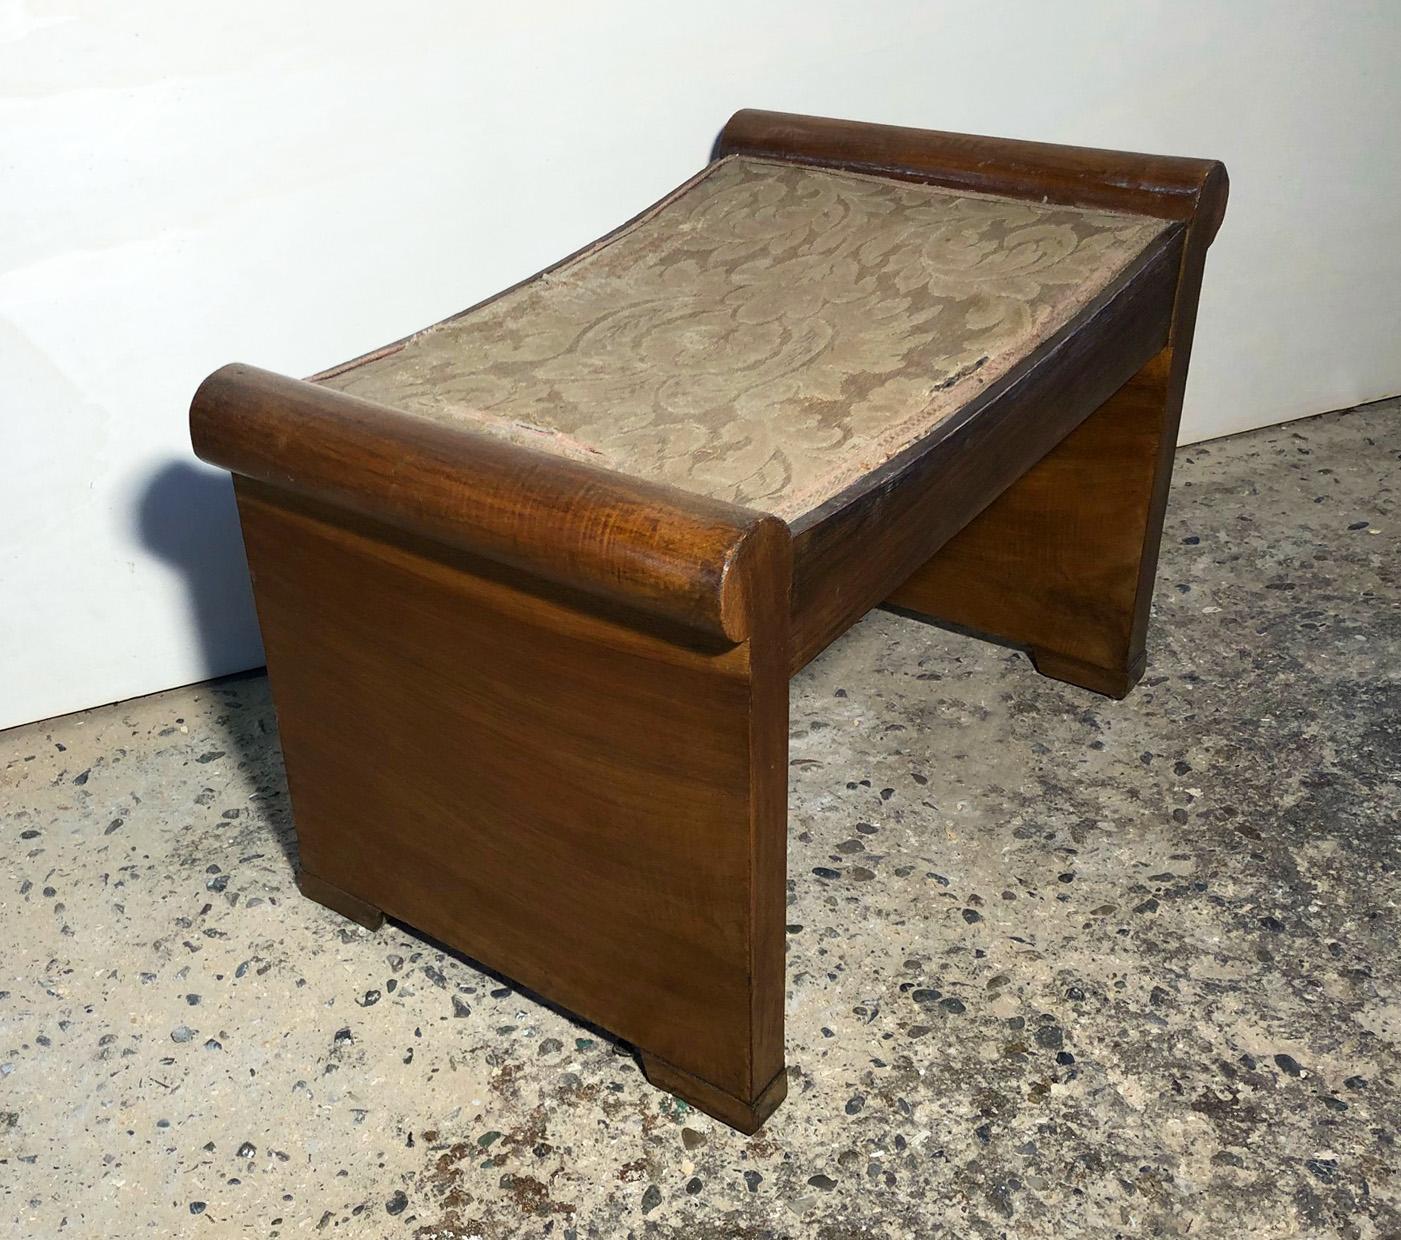 Original Italian Decò bench from 1920 with upholstery to be redone, natural color
Original upholstery.

To find out the cost of transport to USA etc write a message indicating the delivery city.